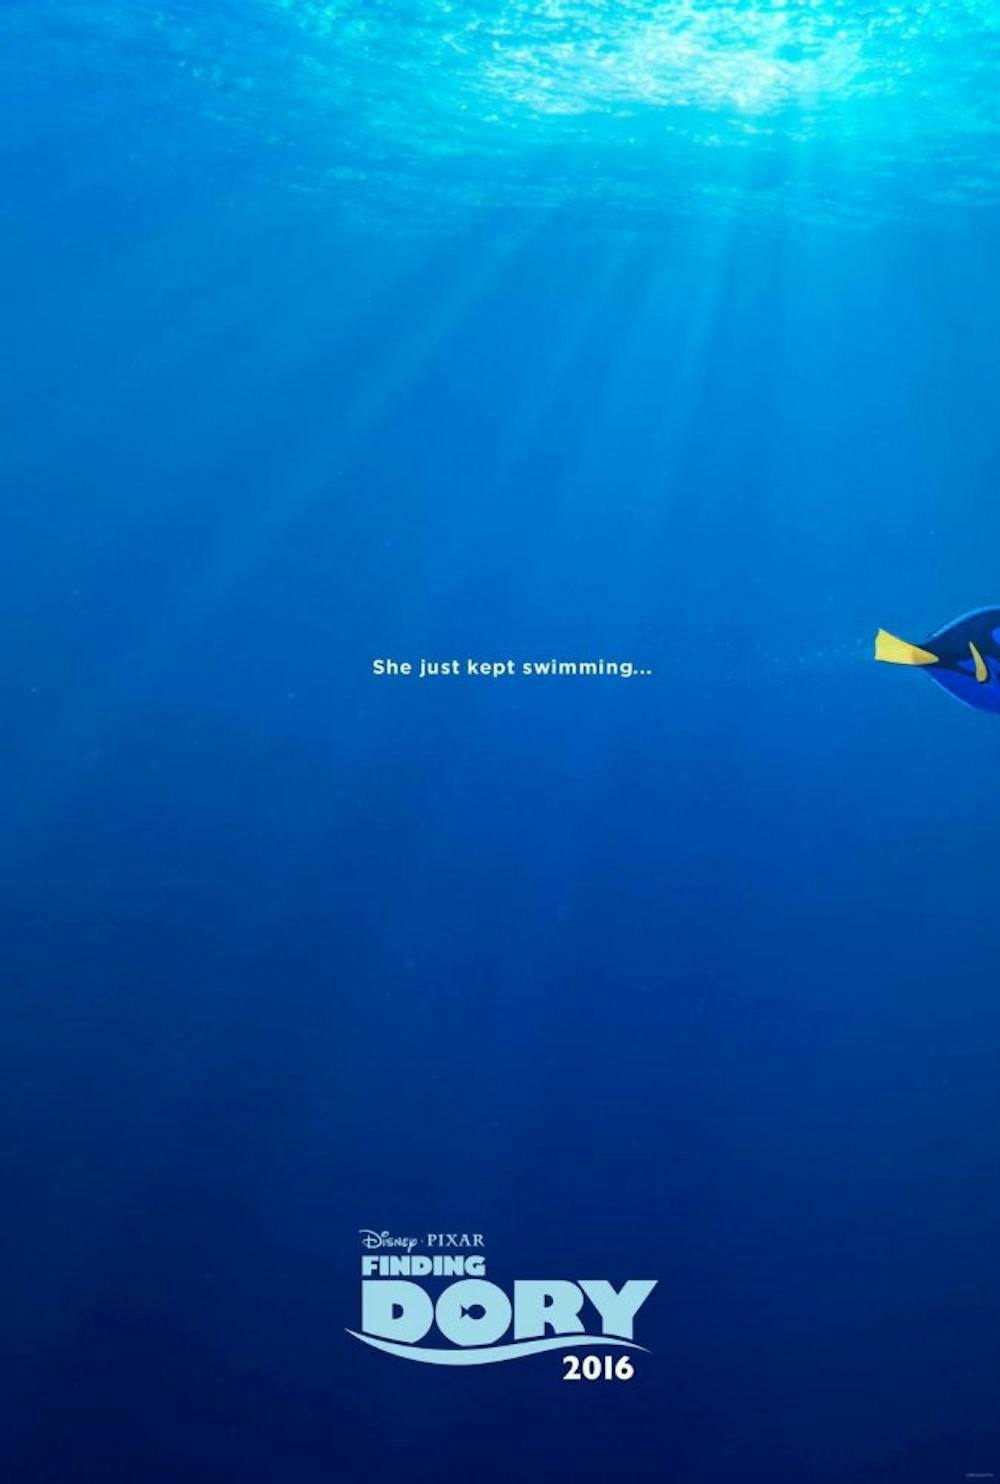 <p>Thirteen years after introducing the lovable and forgetful Blue Tang in "Finding Nemo," Disney Pixar released "Finding Dory," a quirky sequel that gathered much anticipation.</p>